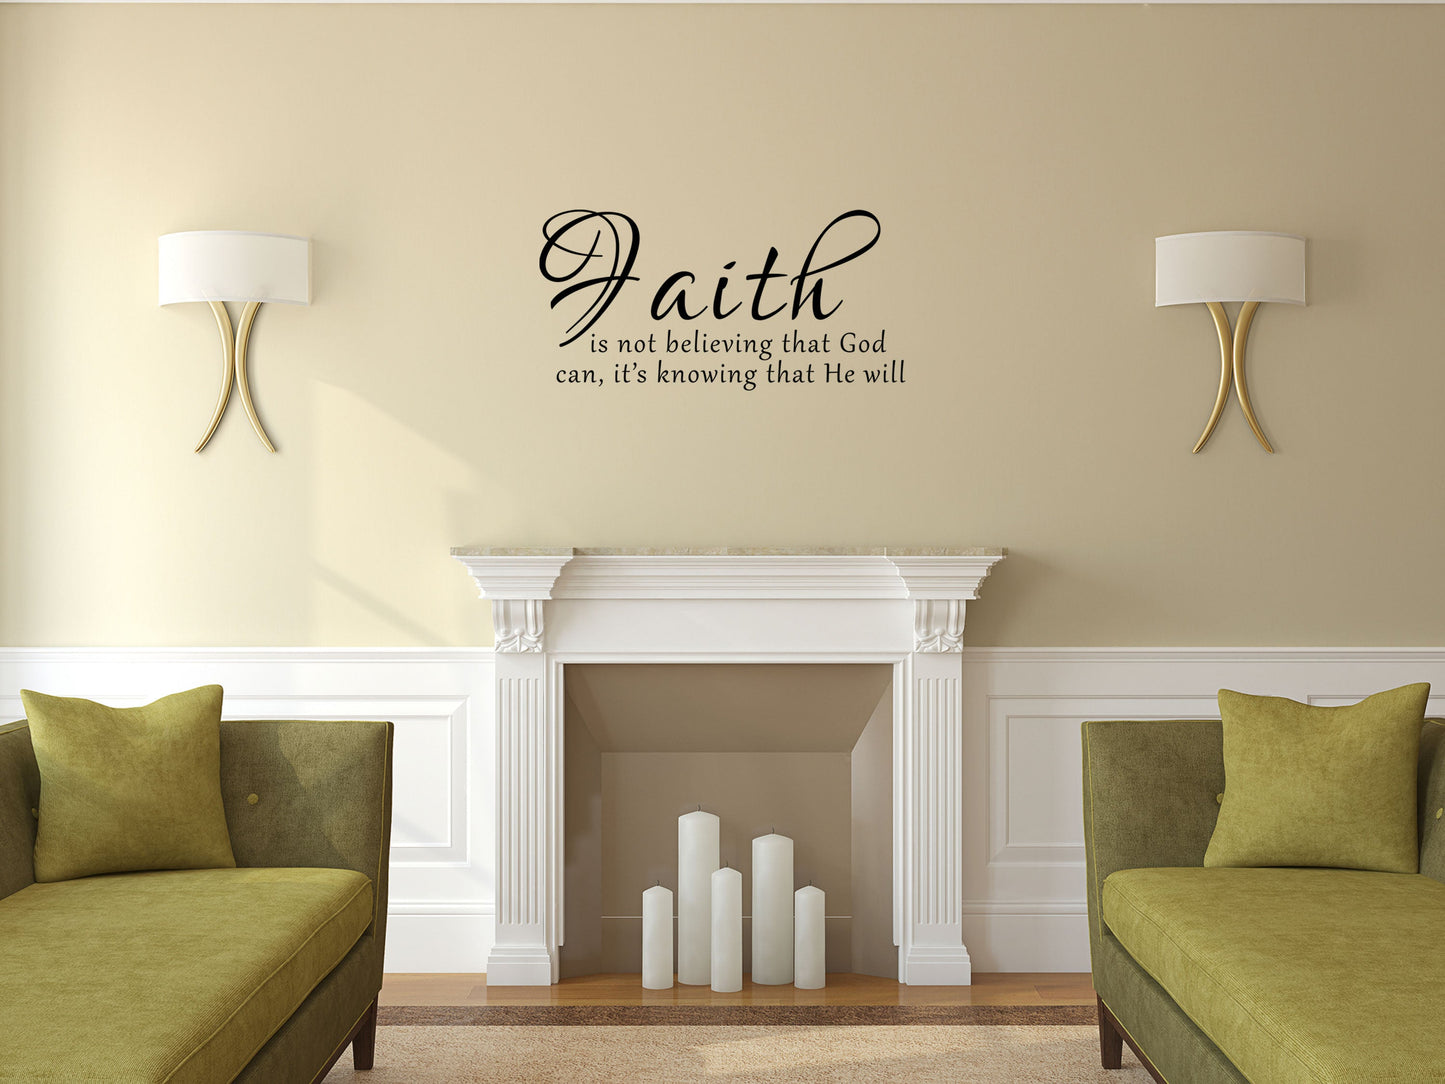 Faith Is Not Believing That God Can - Inspirational Wall Decals Vinyl Wall Decal Inspirational Wall Signs 